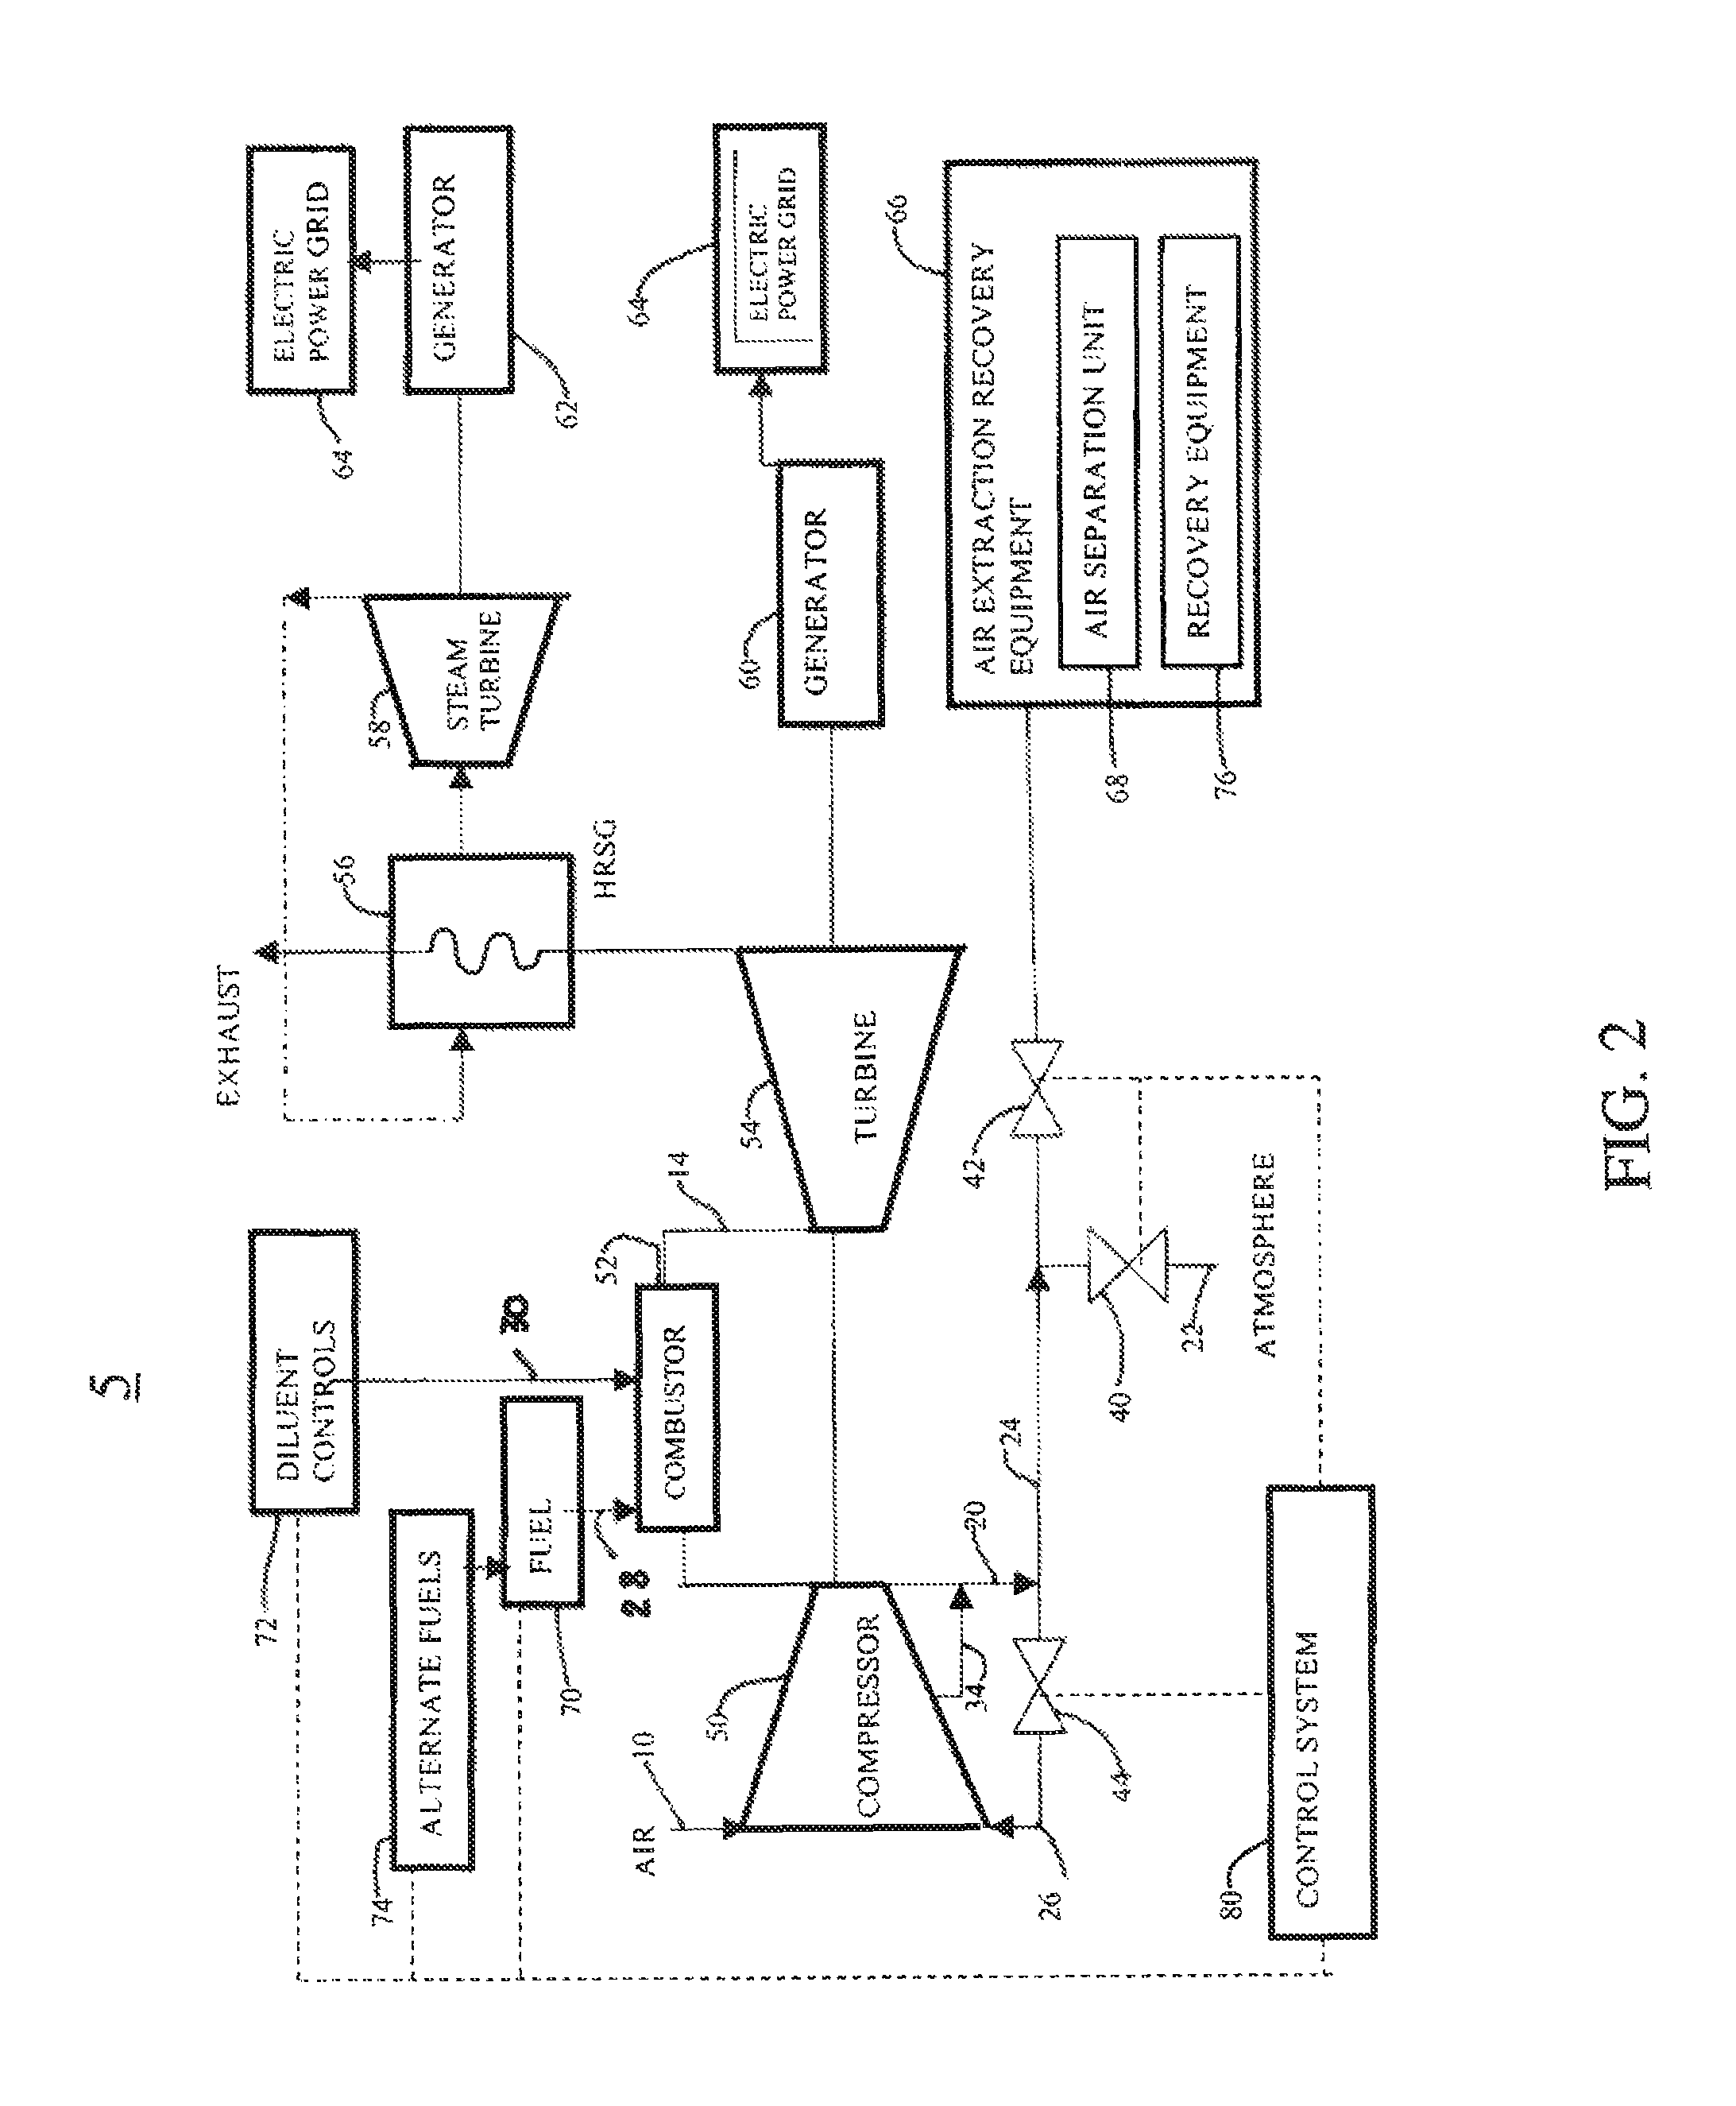 Method for gas turbine operation during under-frequency operation through use of air extraction